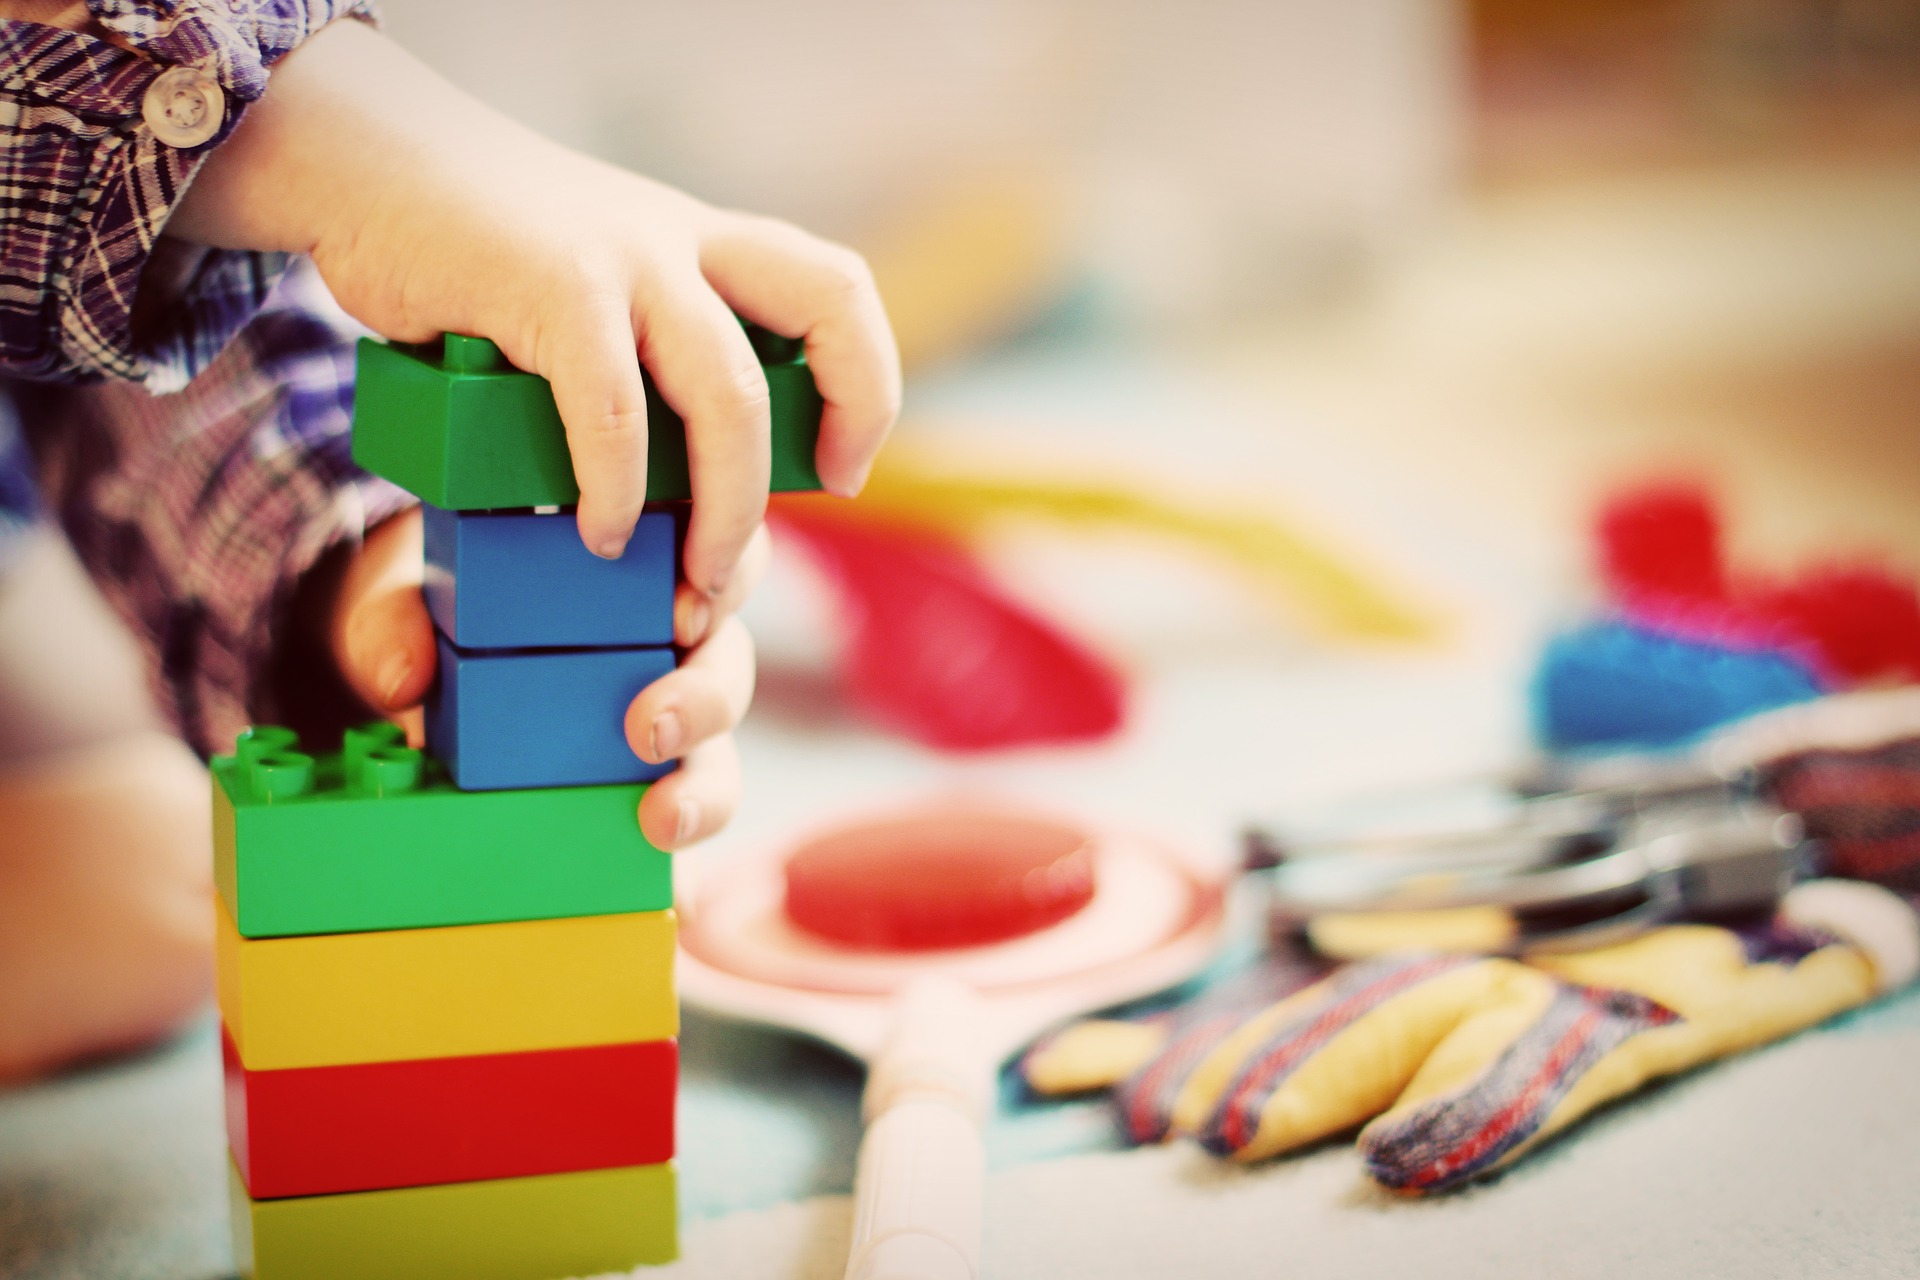 A close up photo of a child's hands building a tower out of Duplo style blocks. Other toys appear in the background.